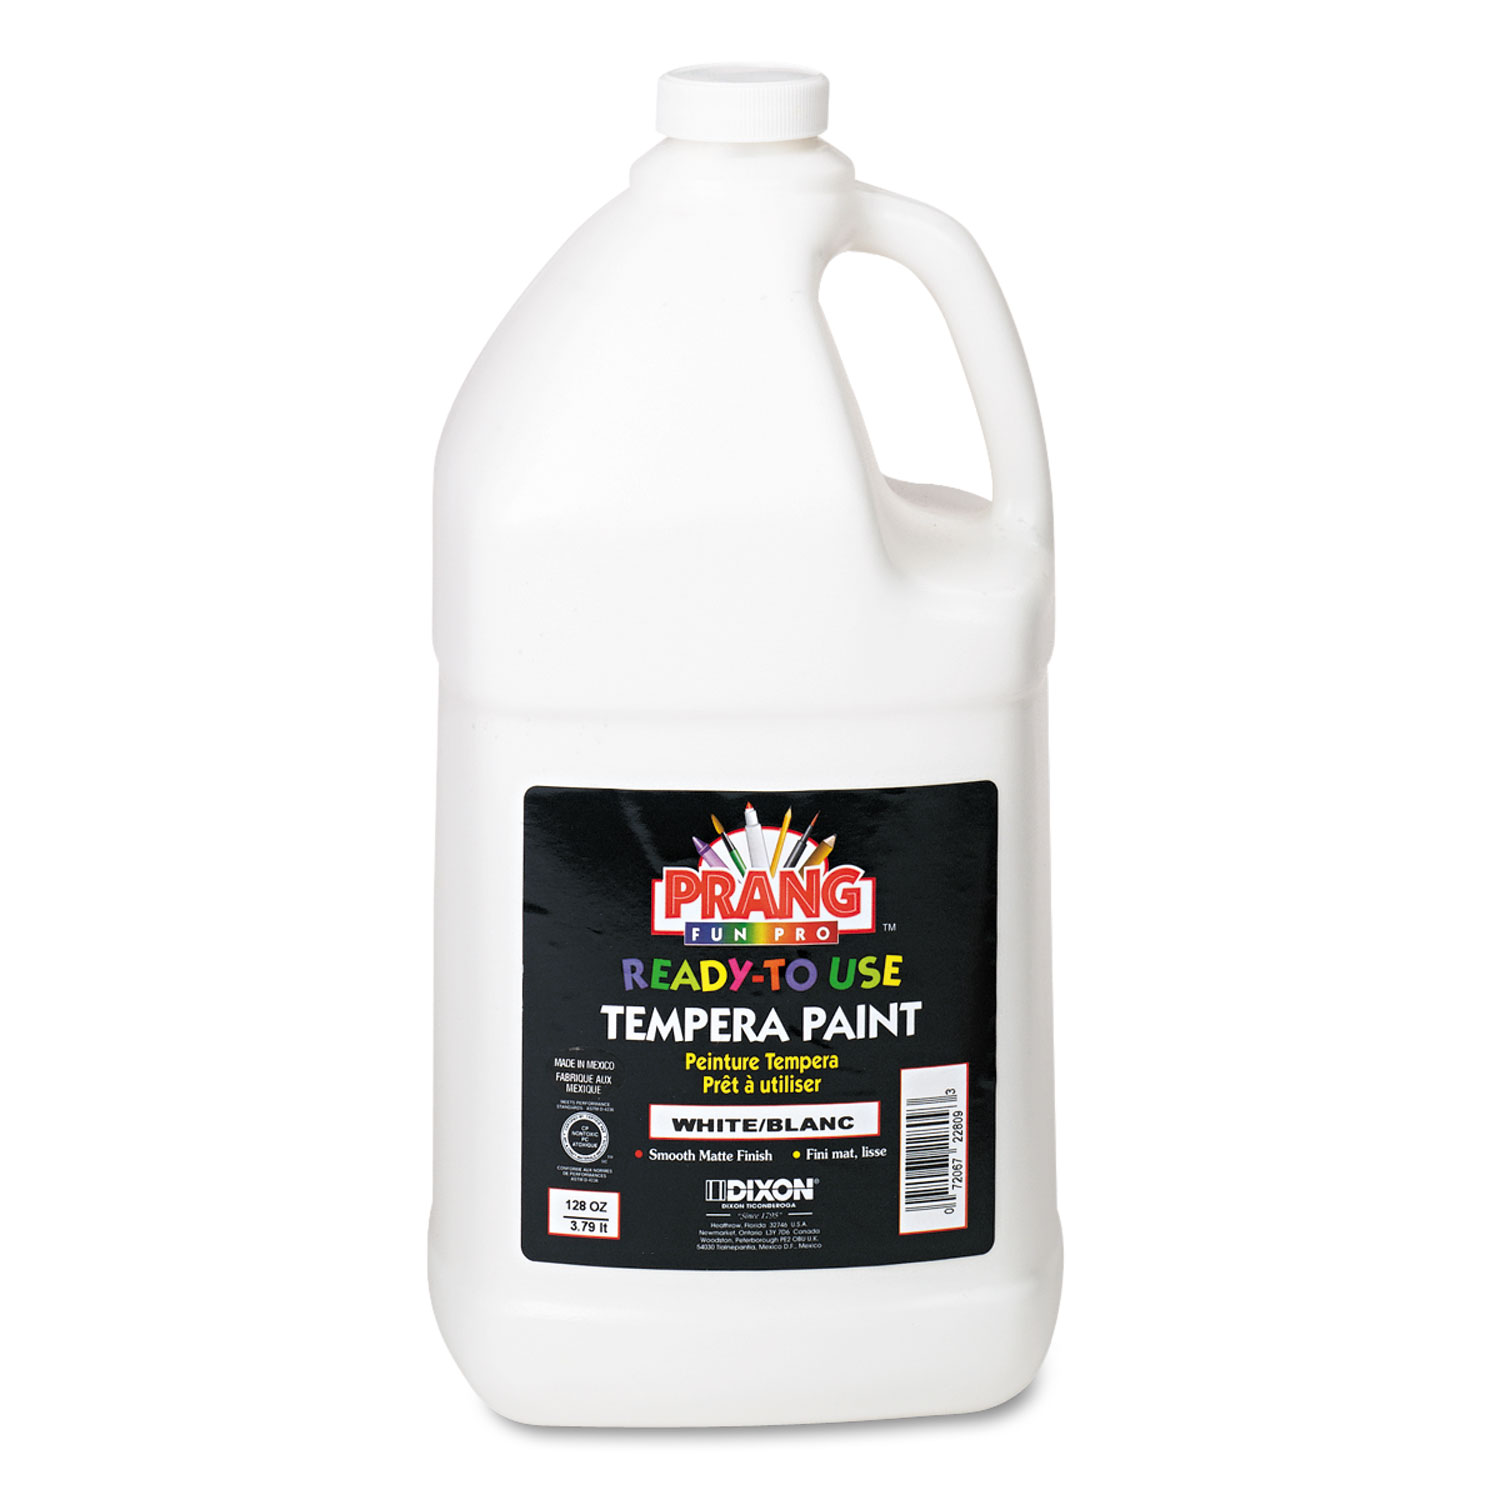 Ready-to-Use Tempera Paint, White, 1 gal